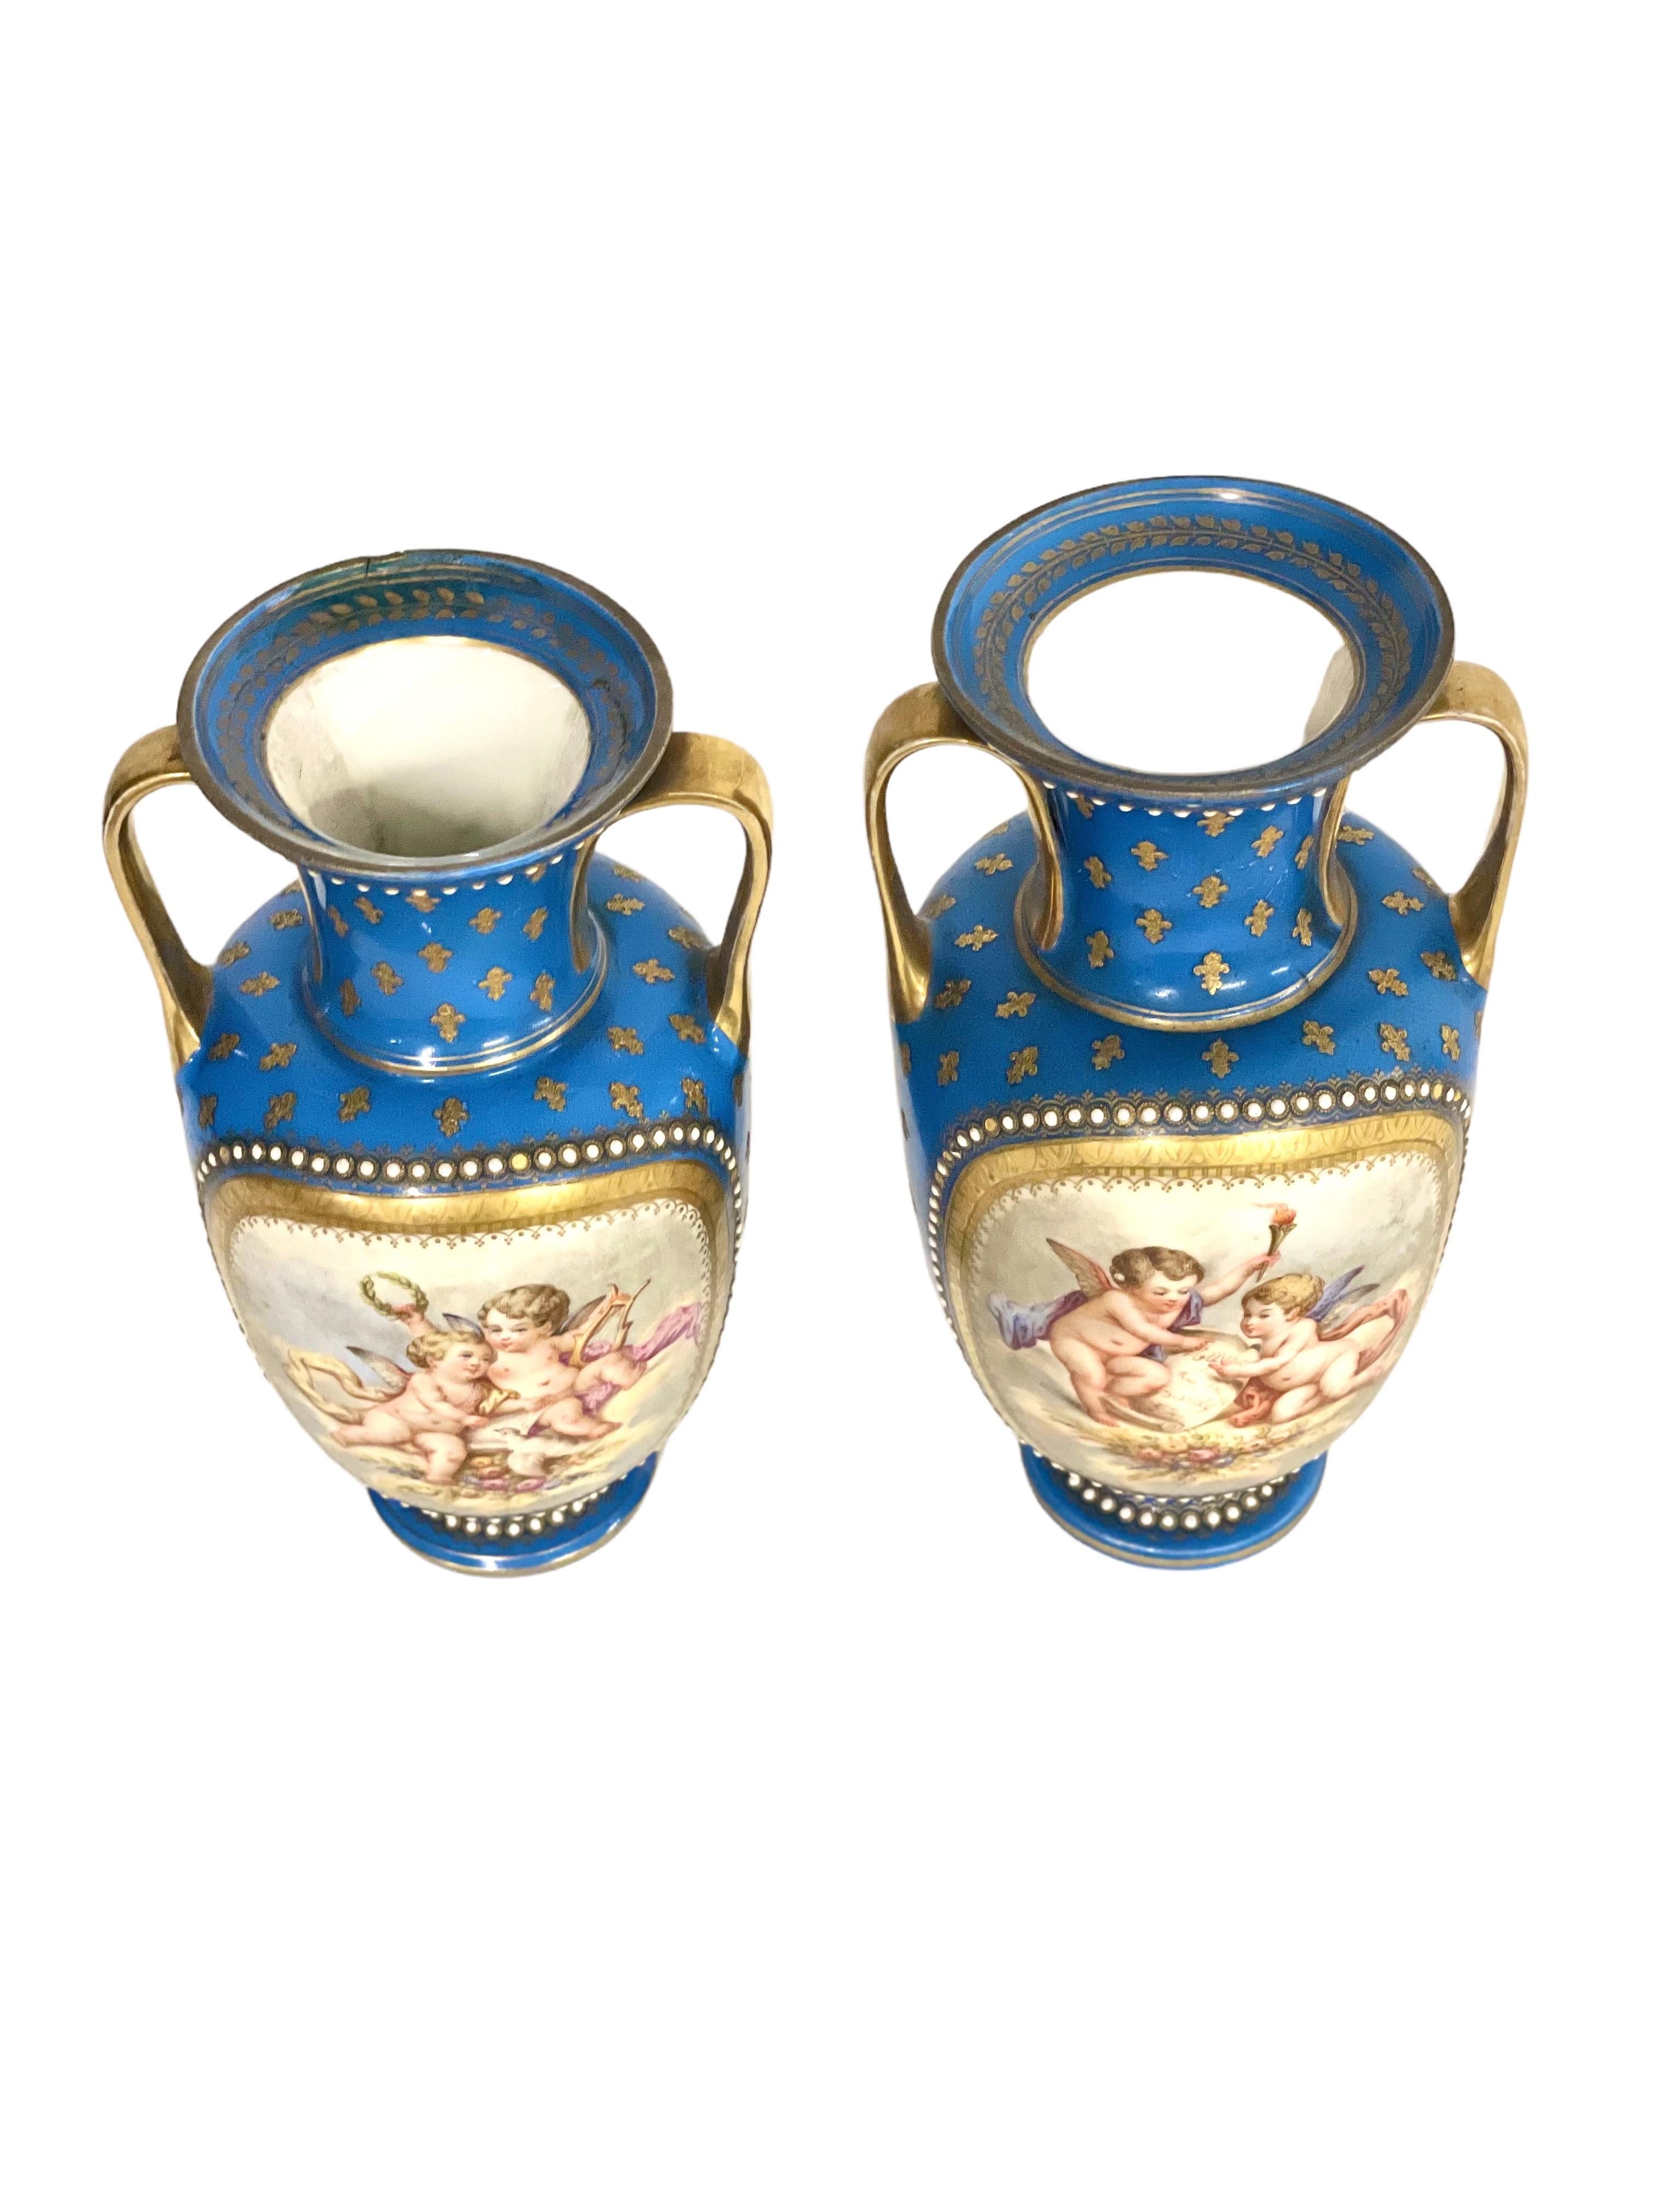 Charles X Sèvres Pair of Gilded and Blue Porcelain Vases, 19th Century For Sale